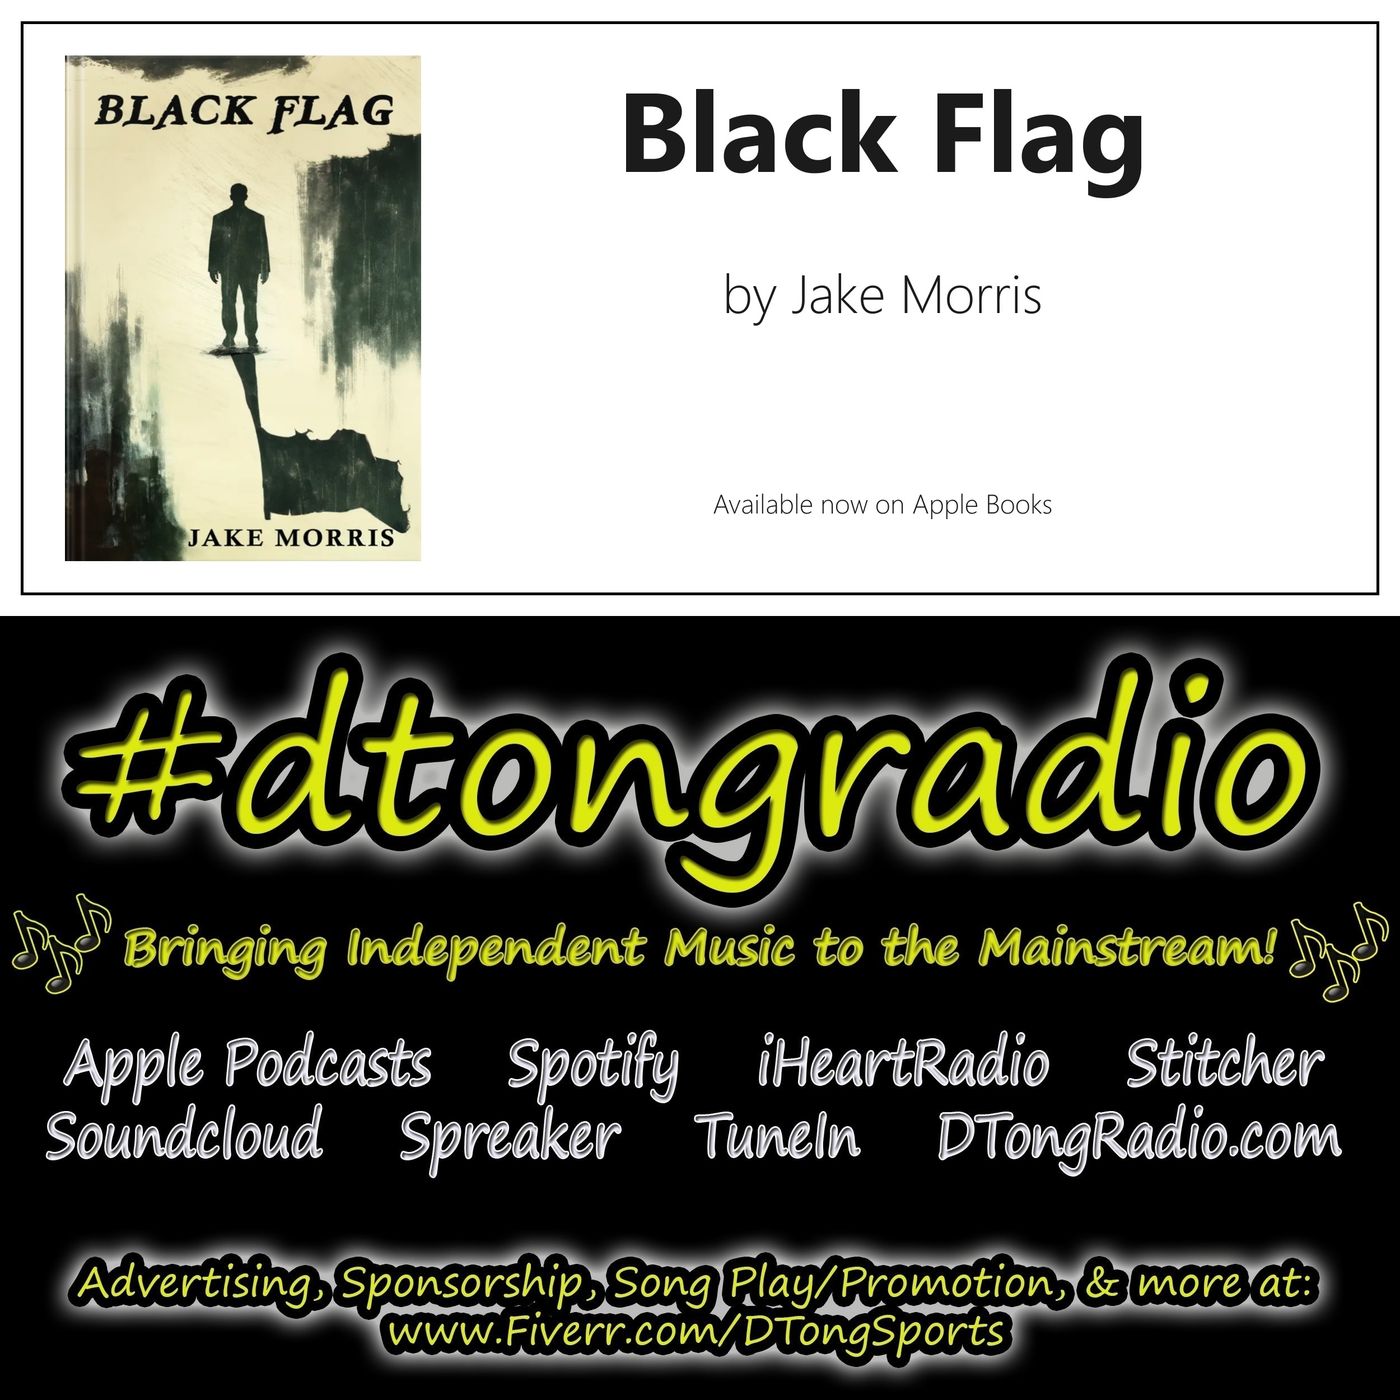 The BEST Indie Music on #dtongradio - Powered by 'Black Flag' & Author Jake Morris